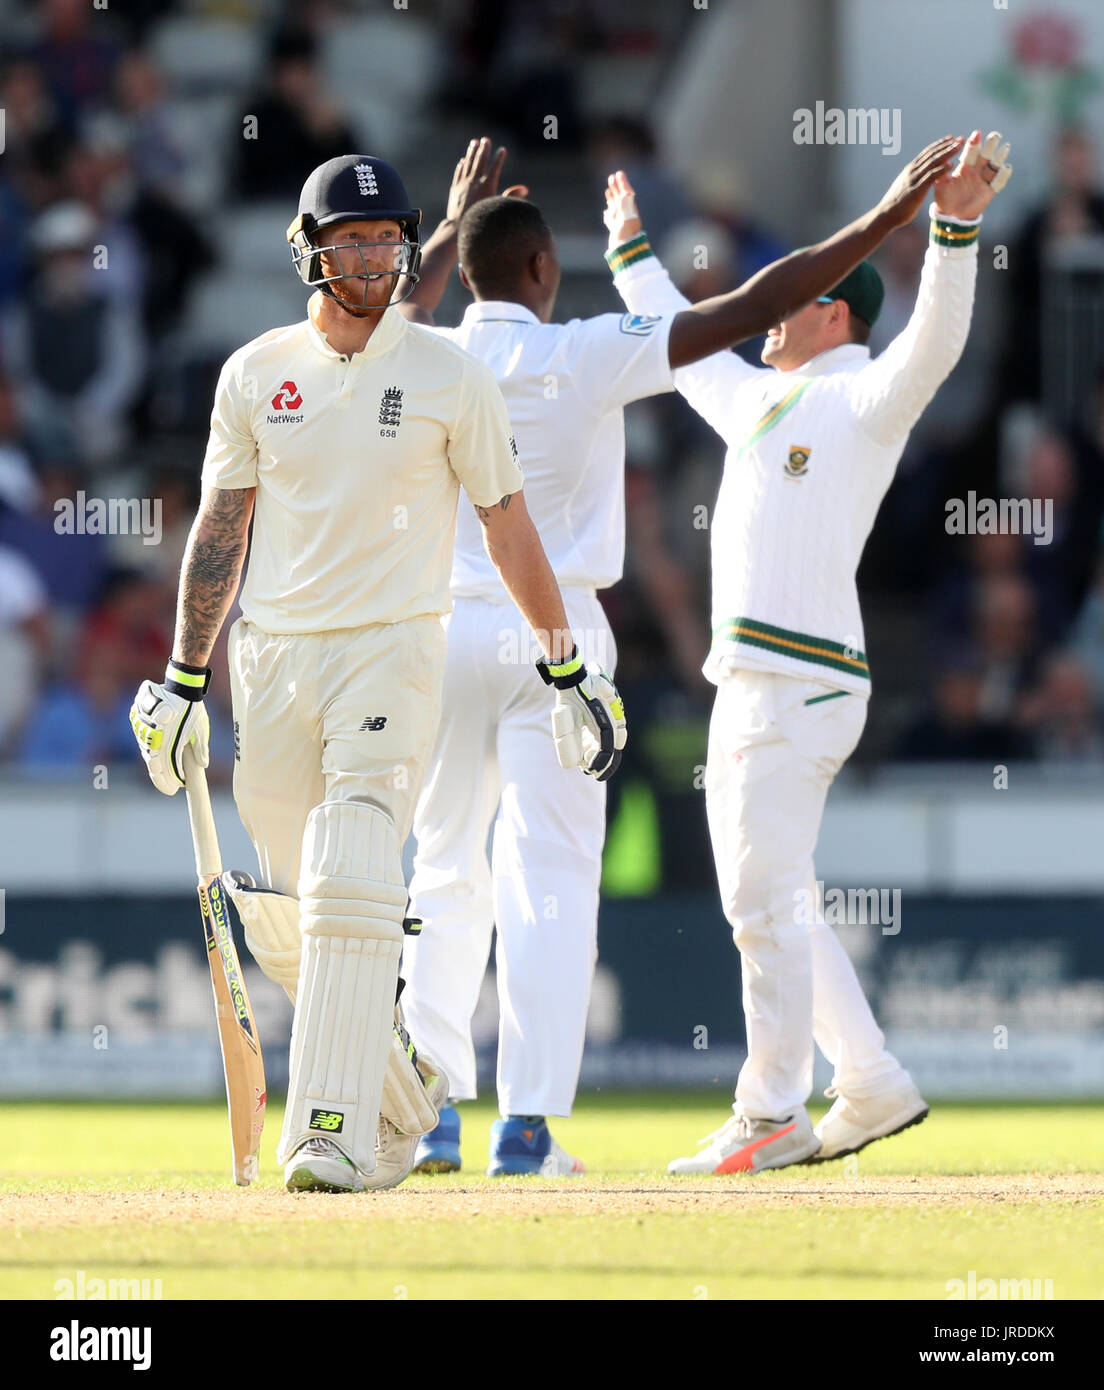 England's Ben Stokes walks off after being dismissed by South Africa's Kagiso Rabada during the Fourth Investec Test at Emirates Old Trafford, Manchester. Stock Photo